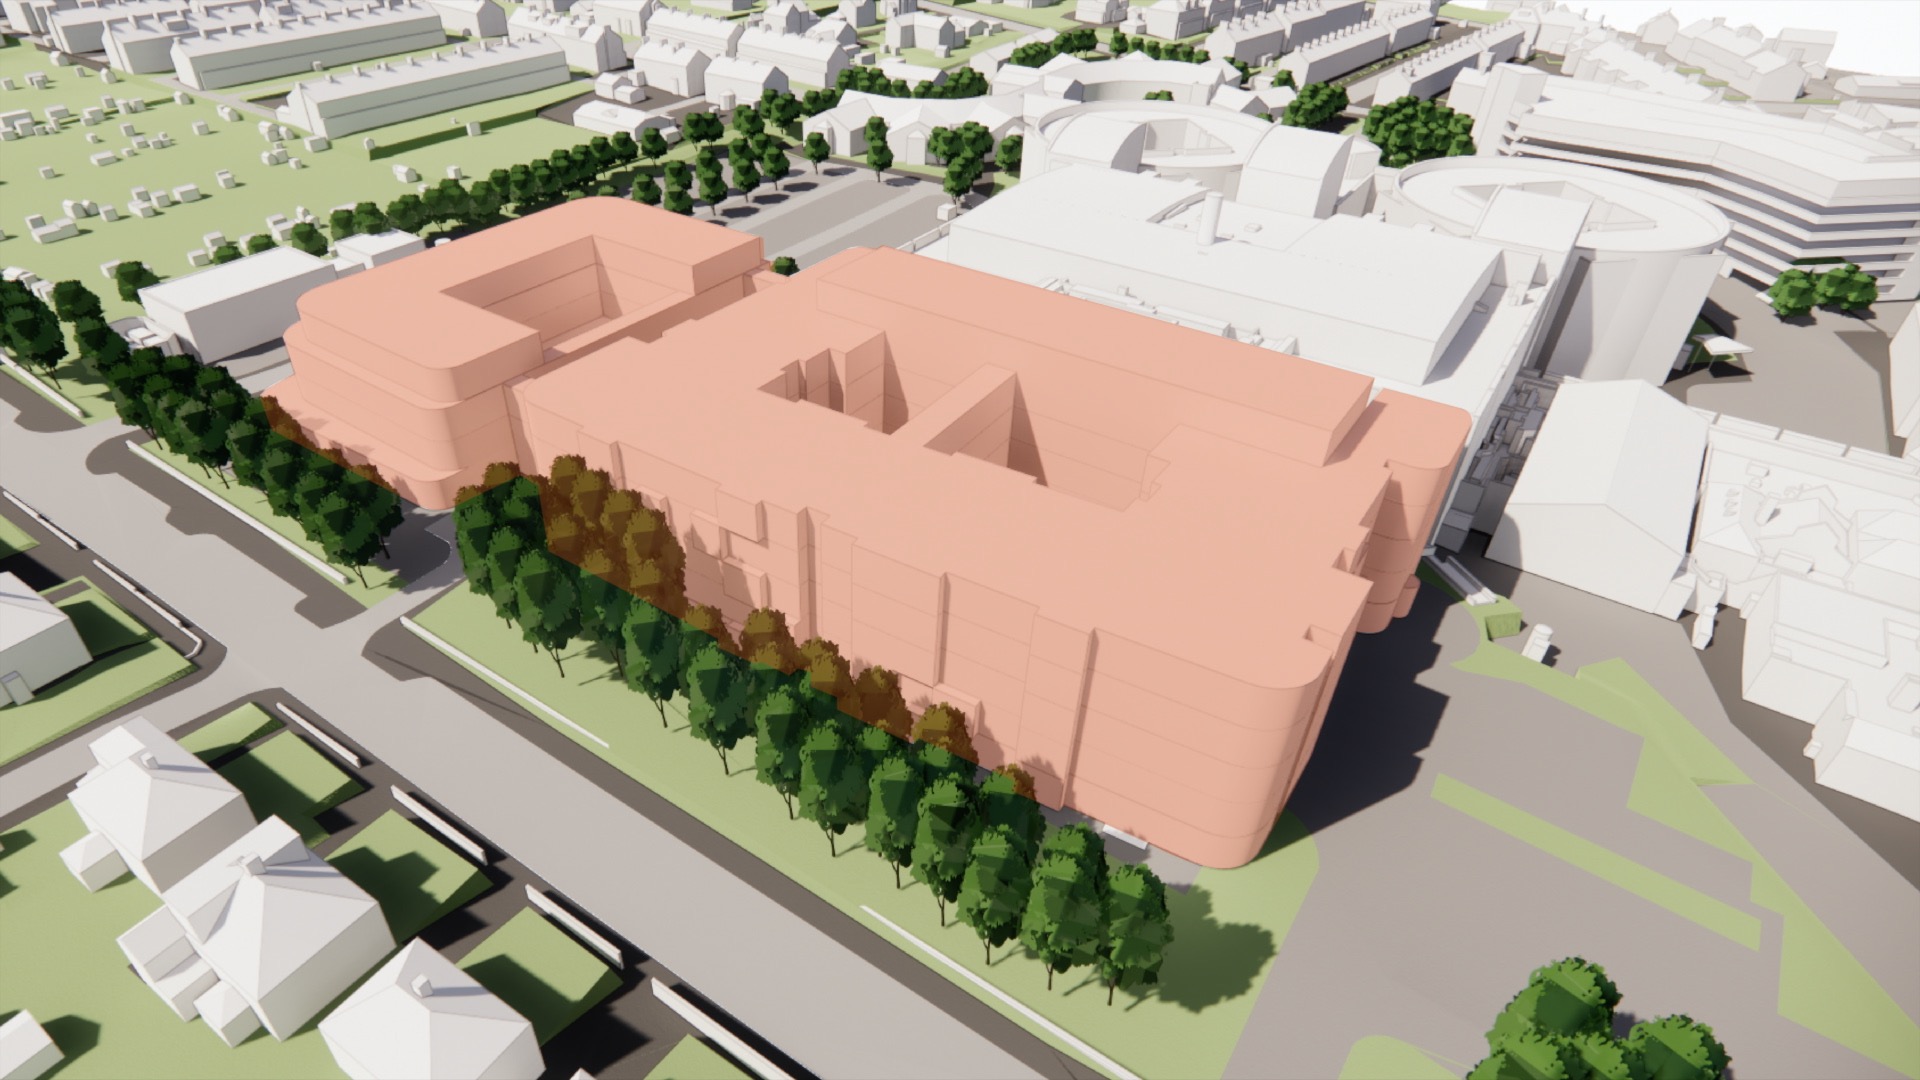 Render showing where the new building will be placed at Calderdale Royal Hospital